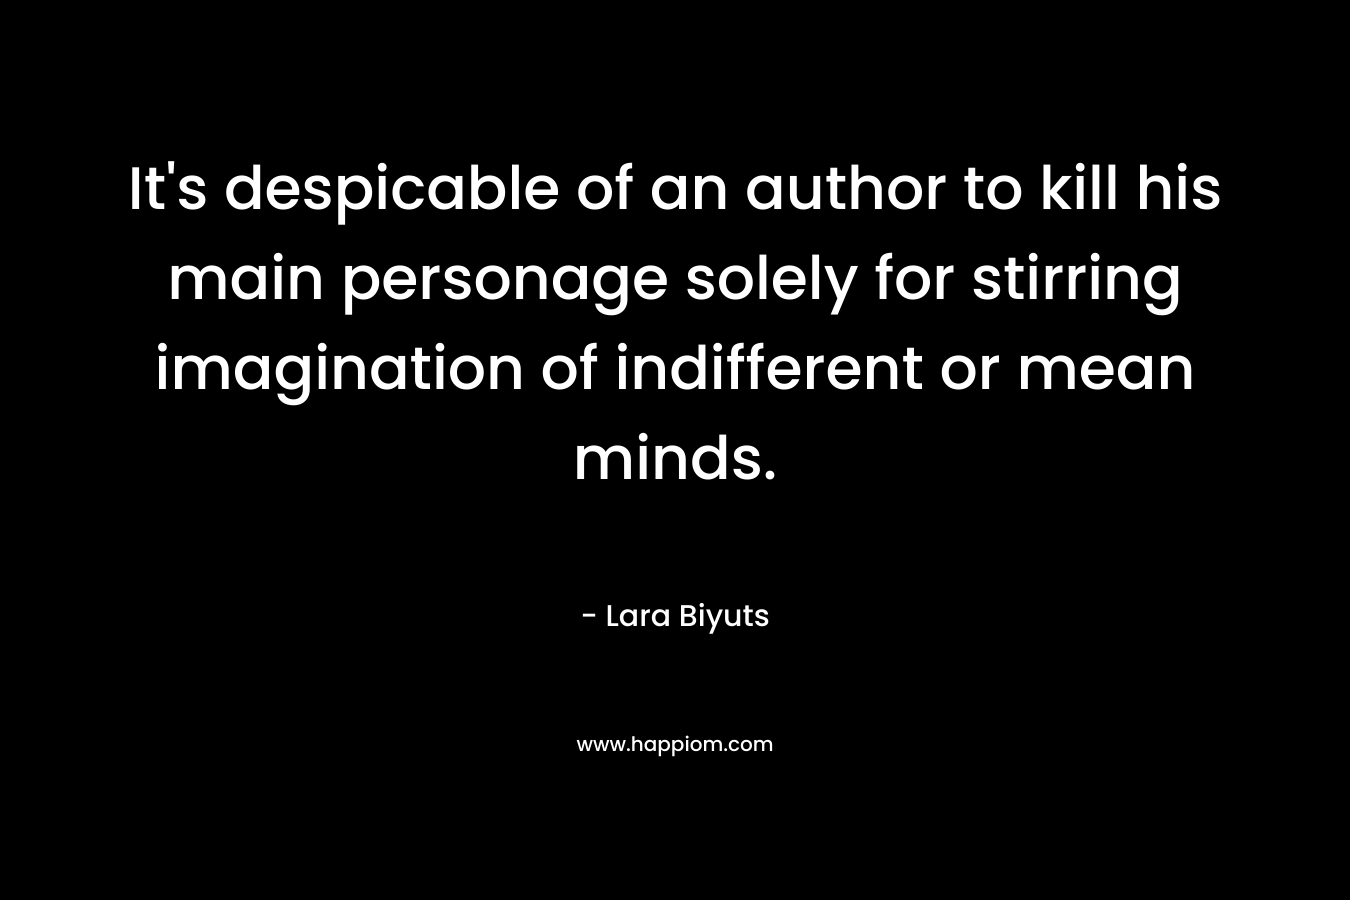 It's despicable of an author to kill his main personage solely for stirring imagination of indifferent or mean minds.